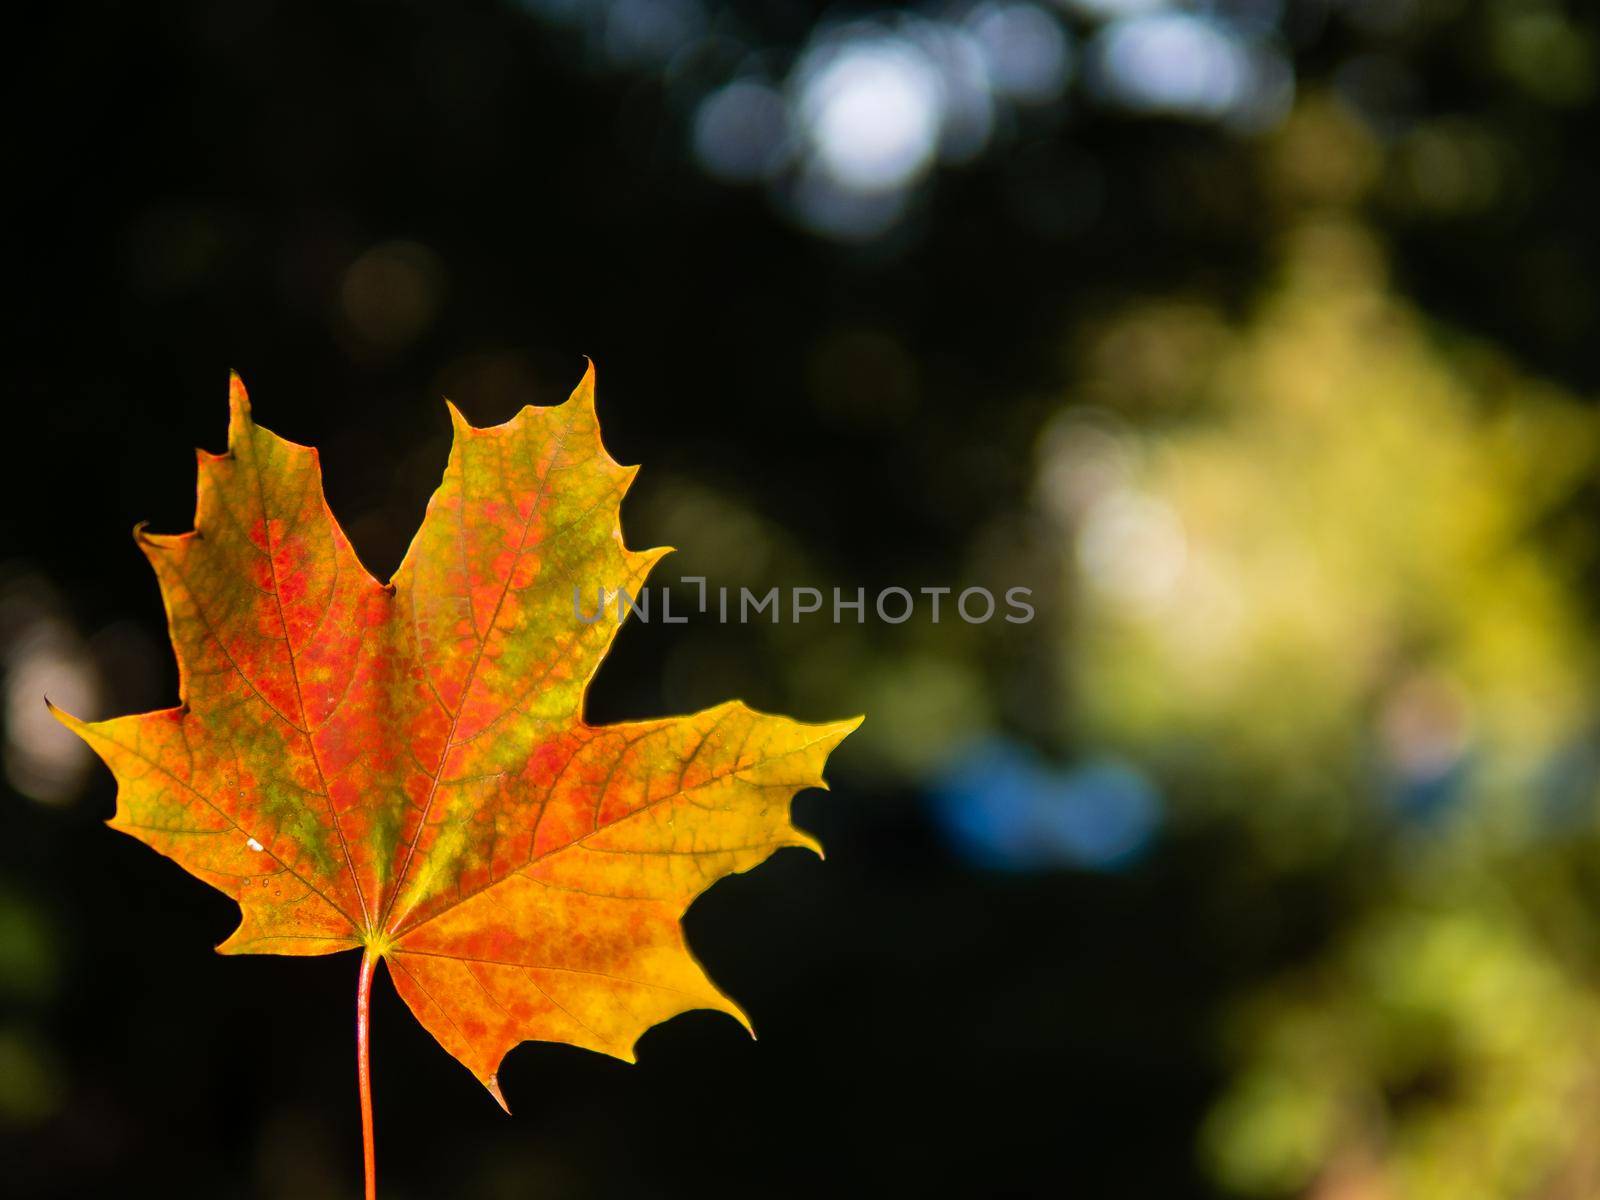 autumn background with bright yellow and red single leaf on dark background.